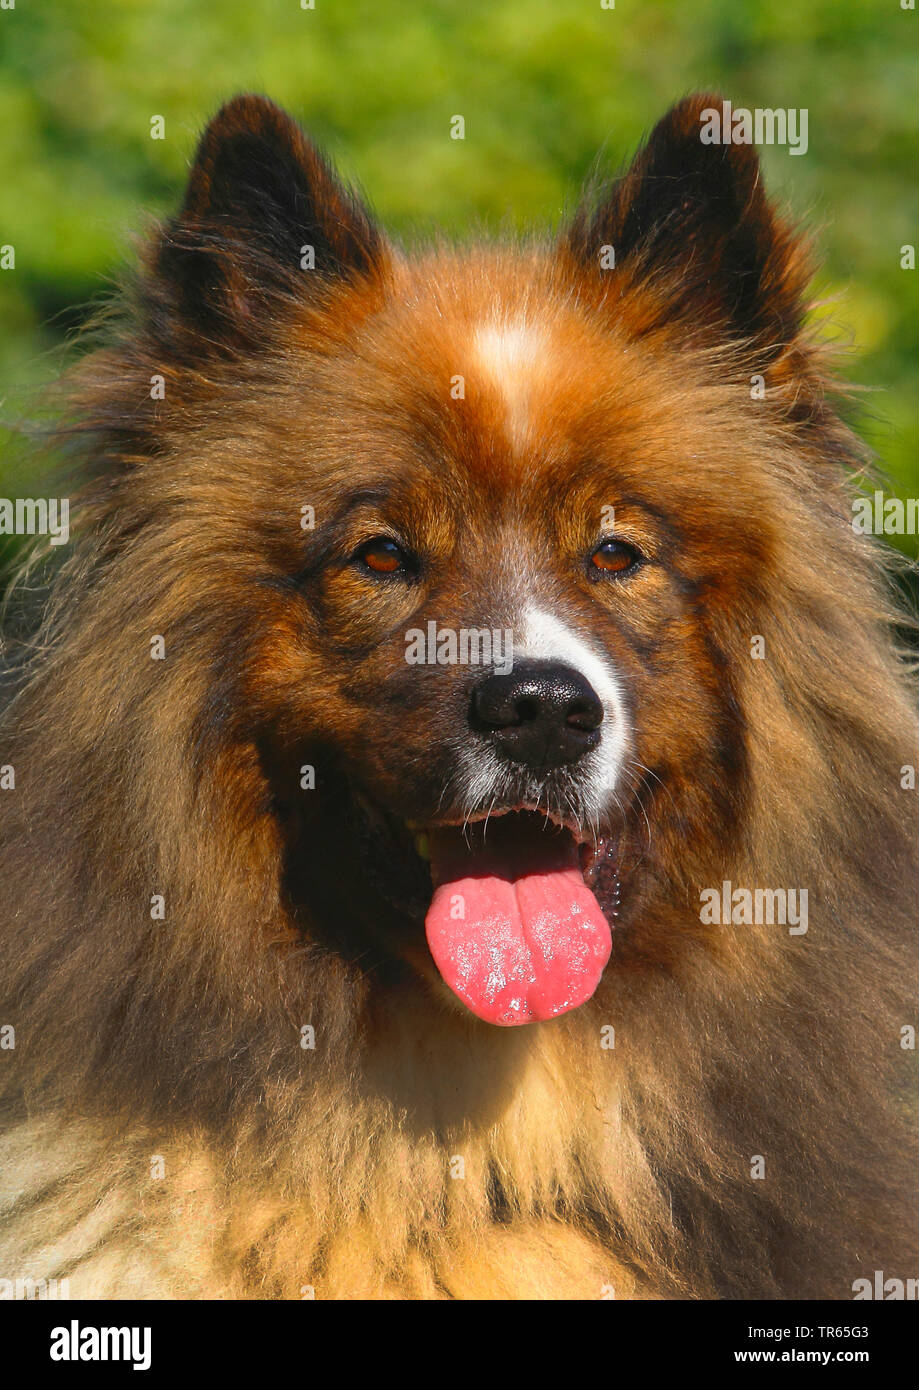 Elo, Great Elo (Canis lupus f. familiaris), five years old male dog, portrait, Germany Stock Photo